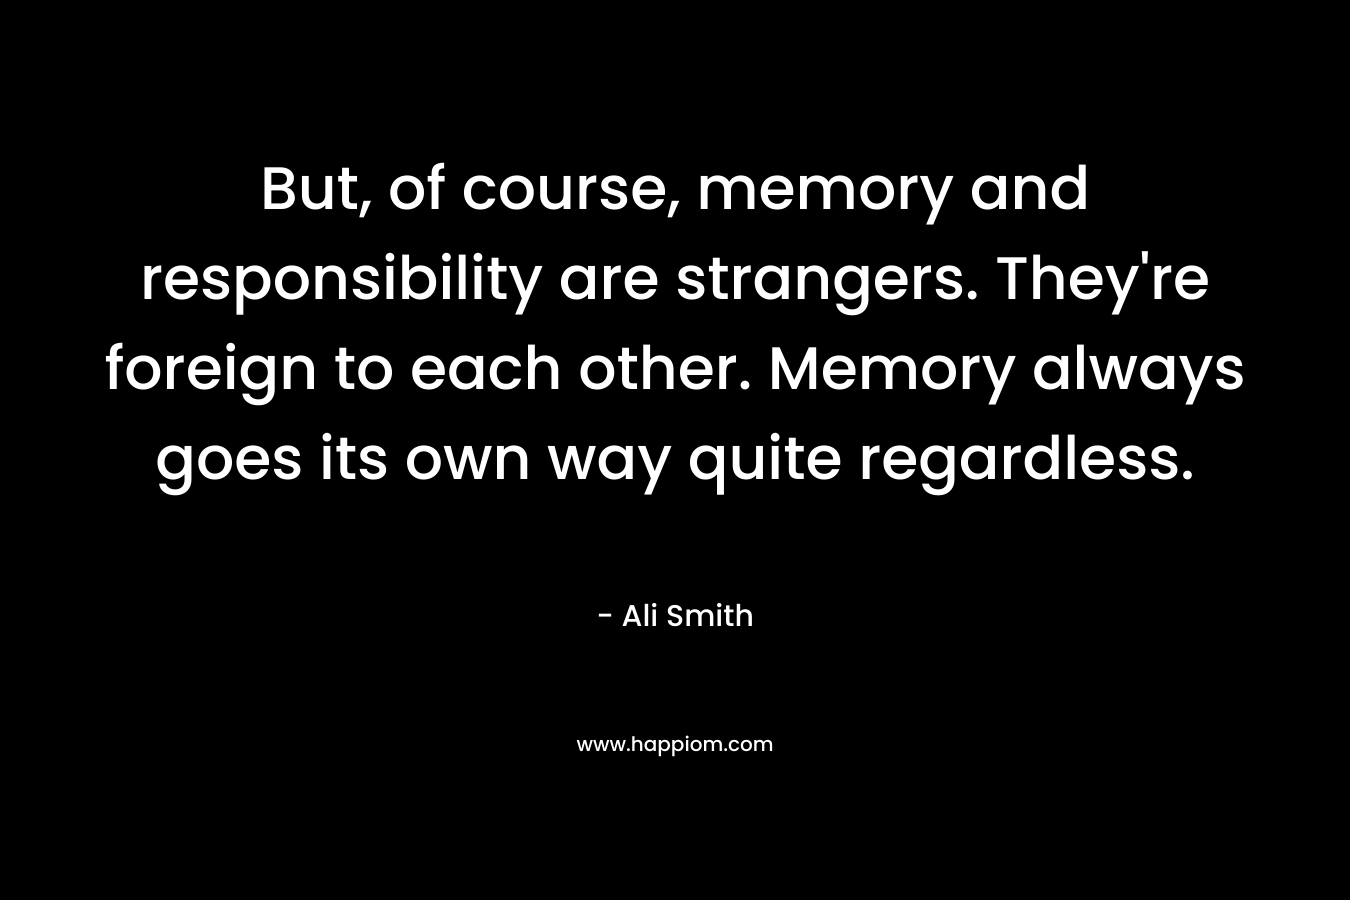 But, of course, memory and responsibility are strangers. They’re foreign to each other. Memory always goes its own way quite regardless. – Ali Smith